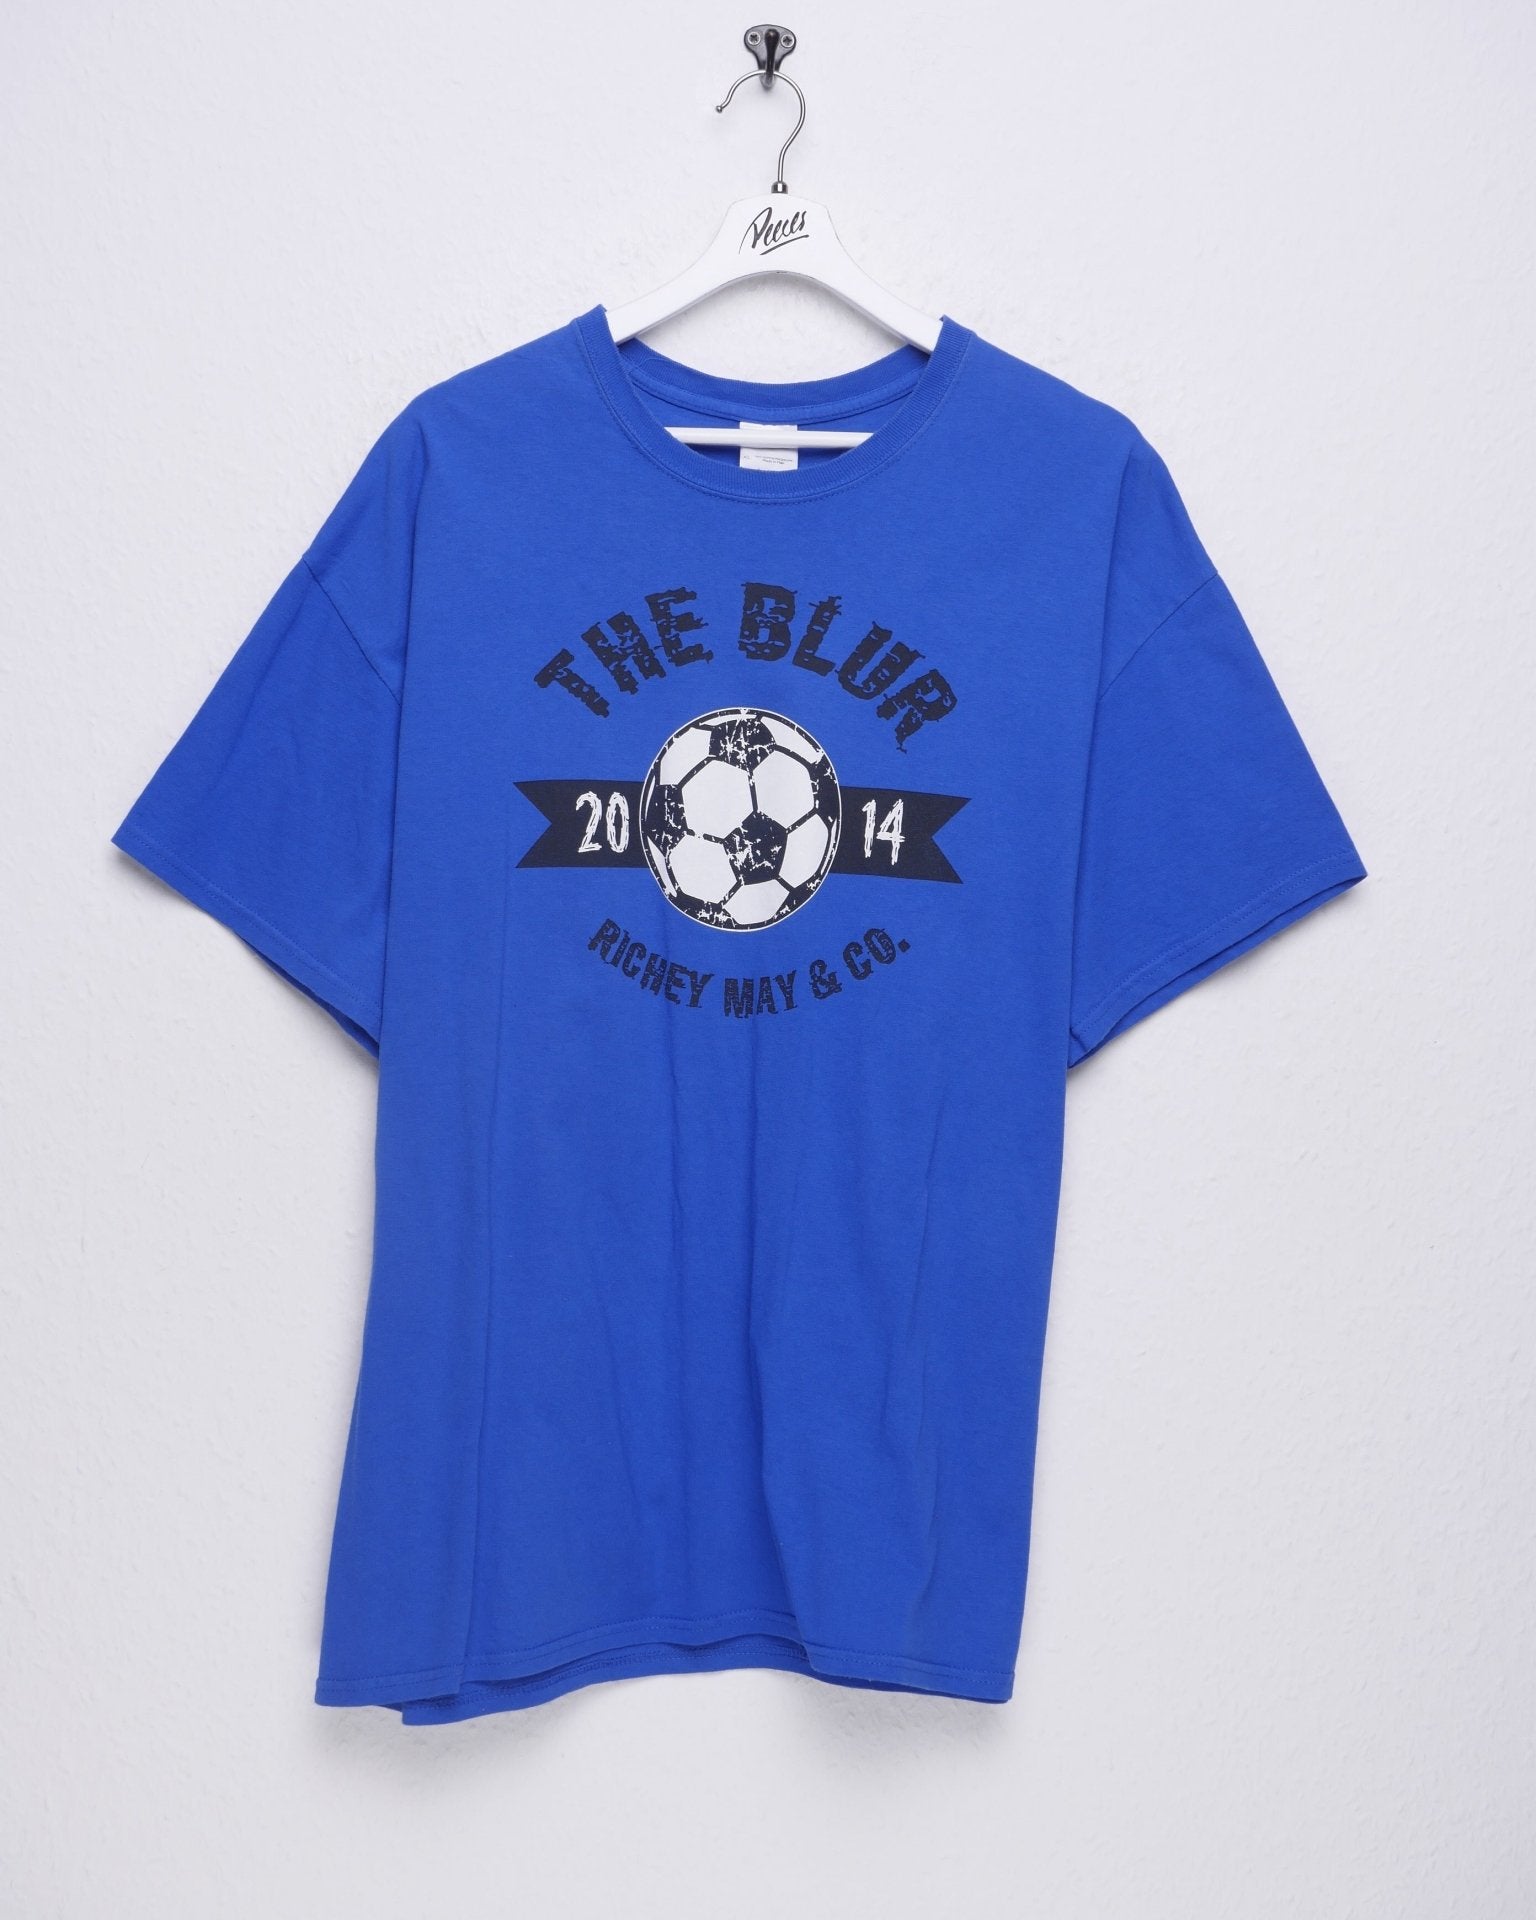 The Blur 2014 printed Graphic blue Shirt - Peeces